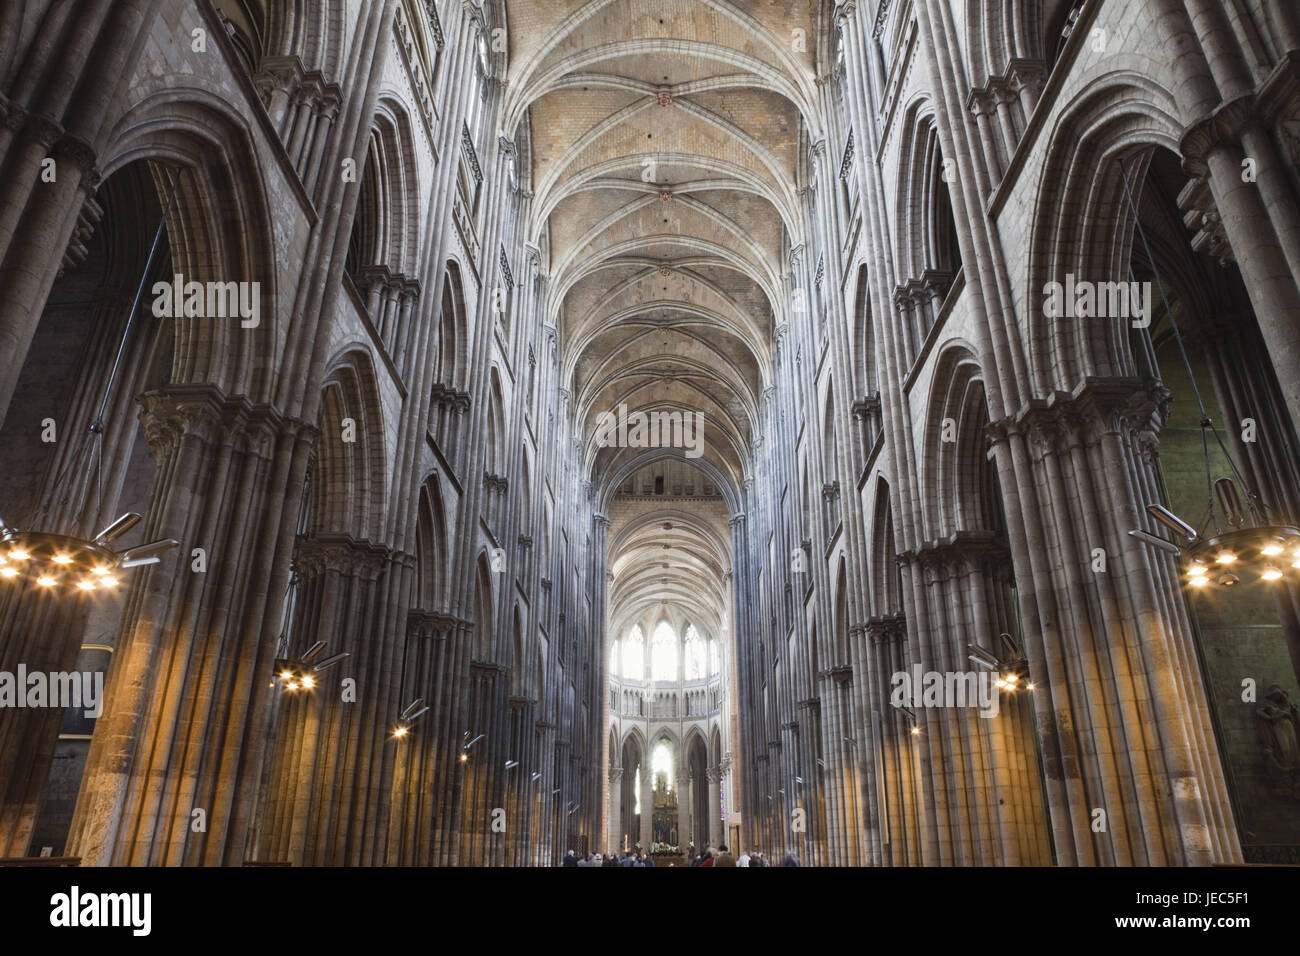 France, Normandy, Rouen, cathedral, Stock Photo